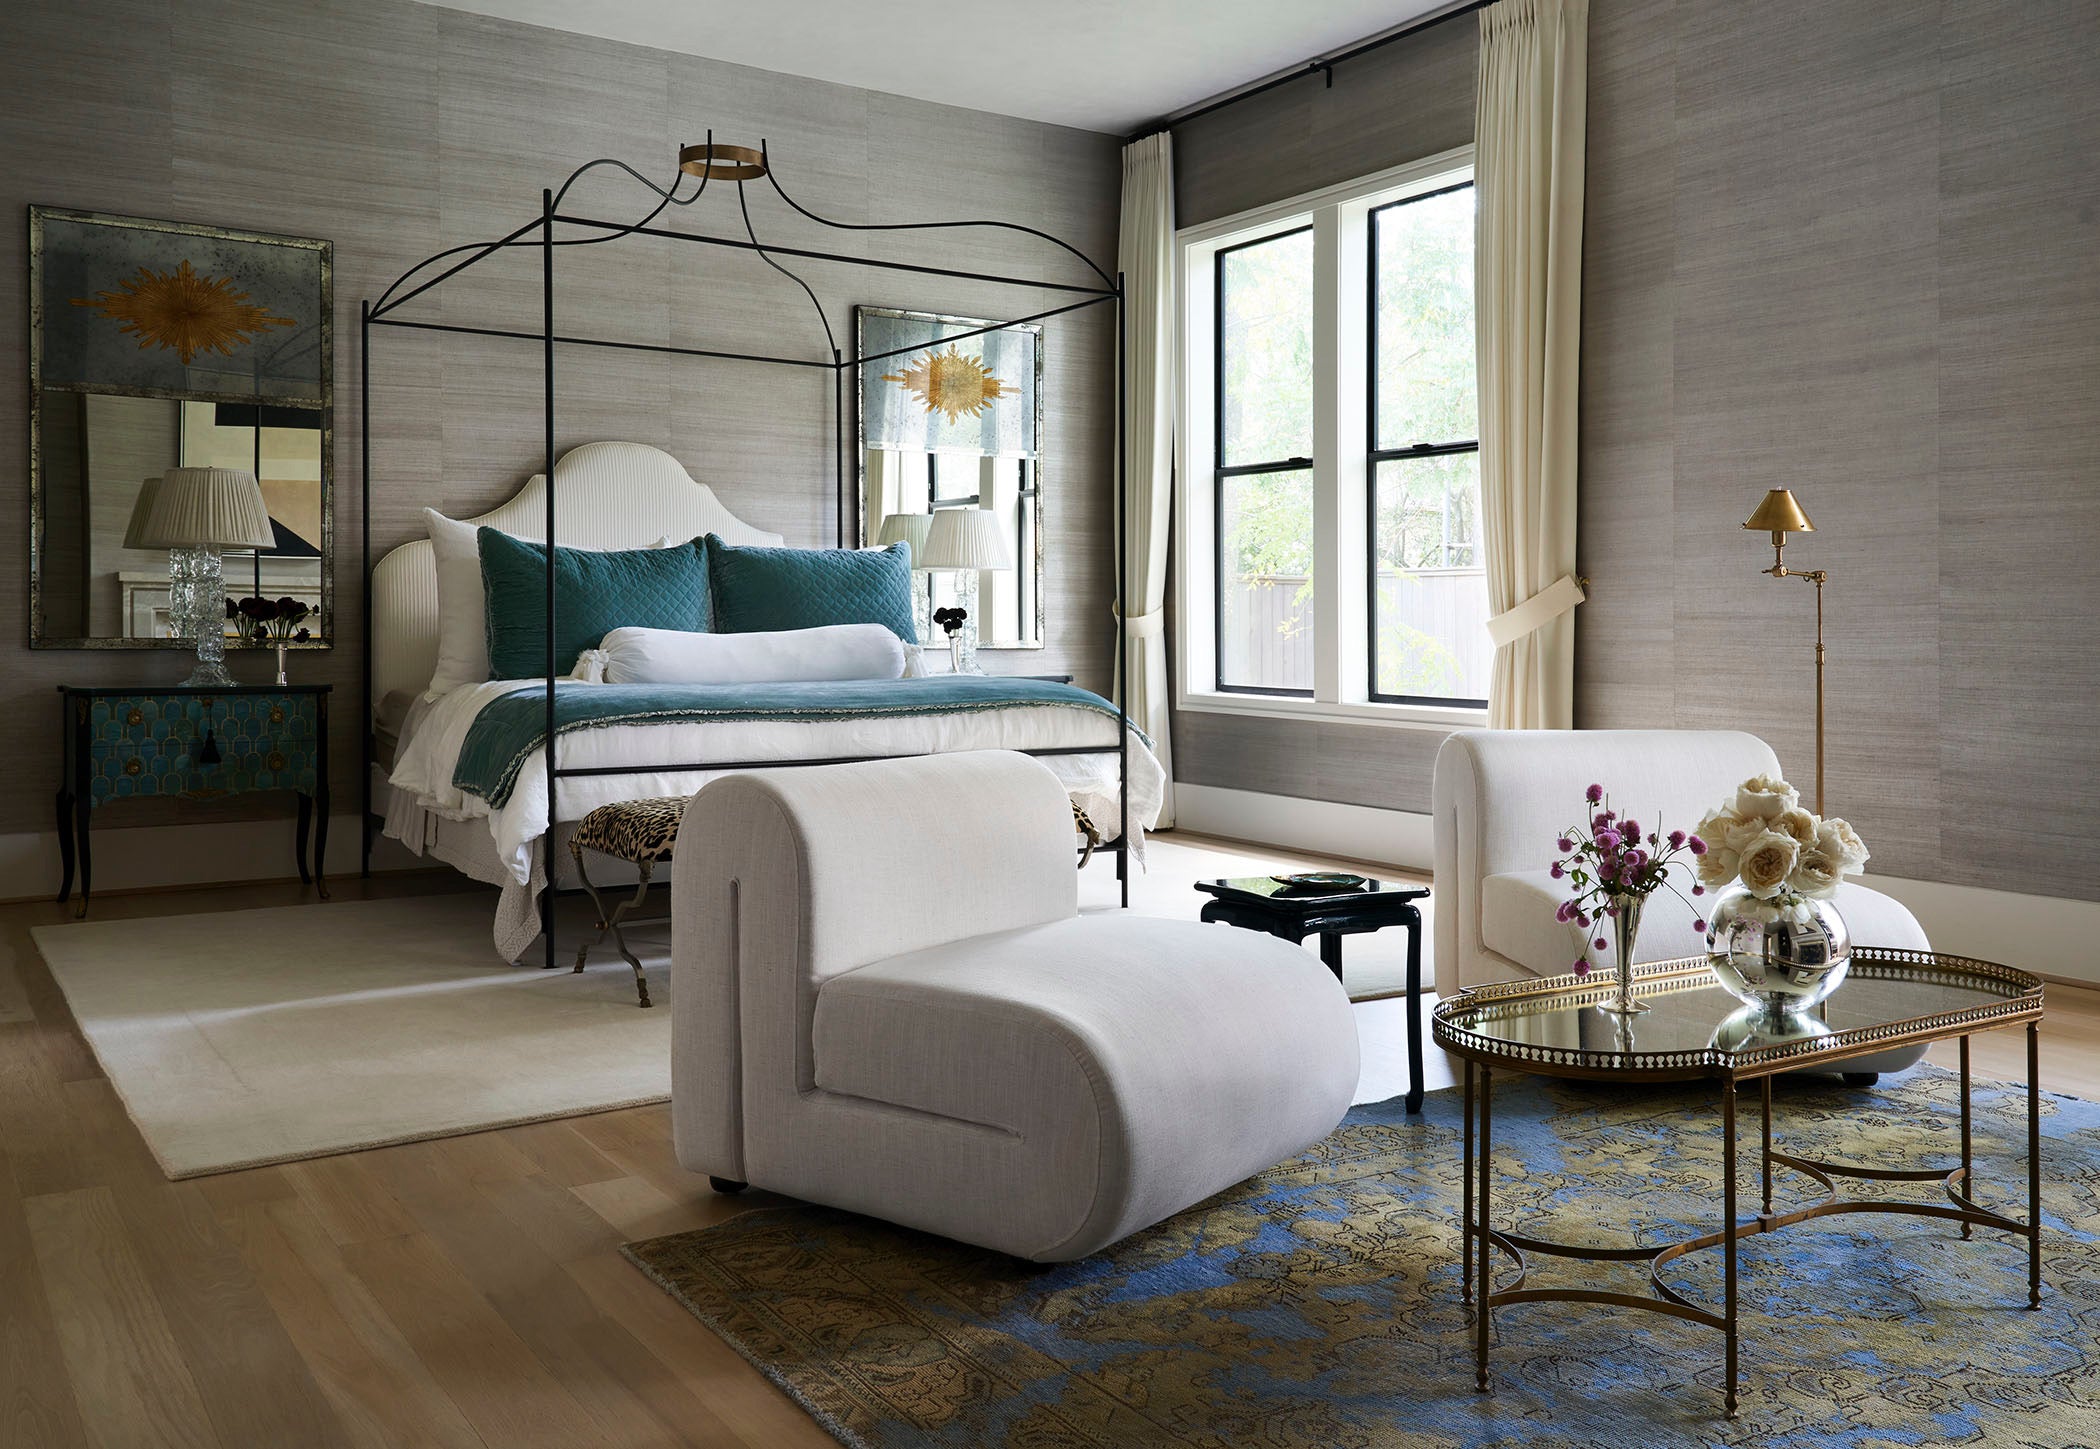 Large bedroom with four poster bed, lounge chair and side table with walls covered in gray sisal grasscloth wallpaper